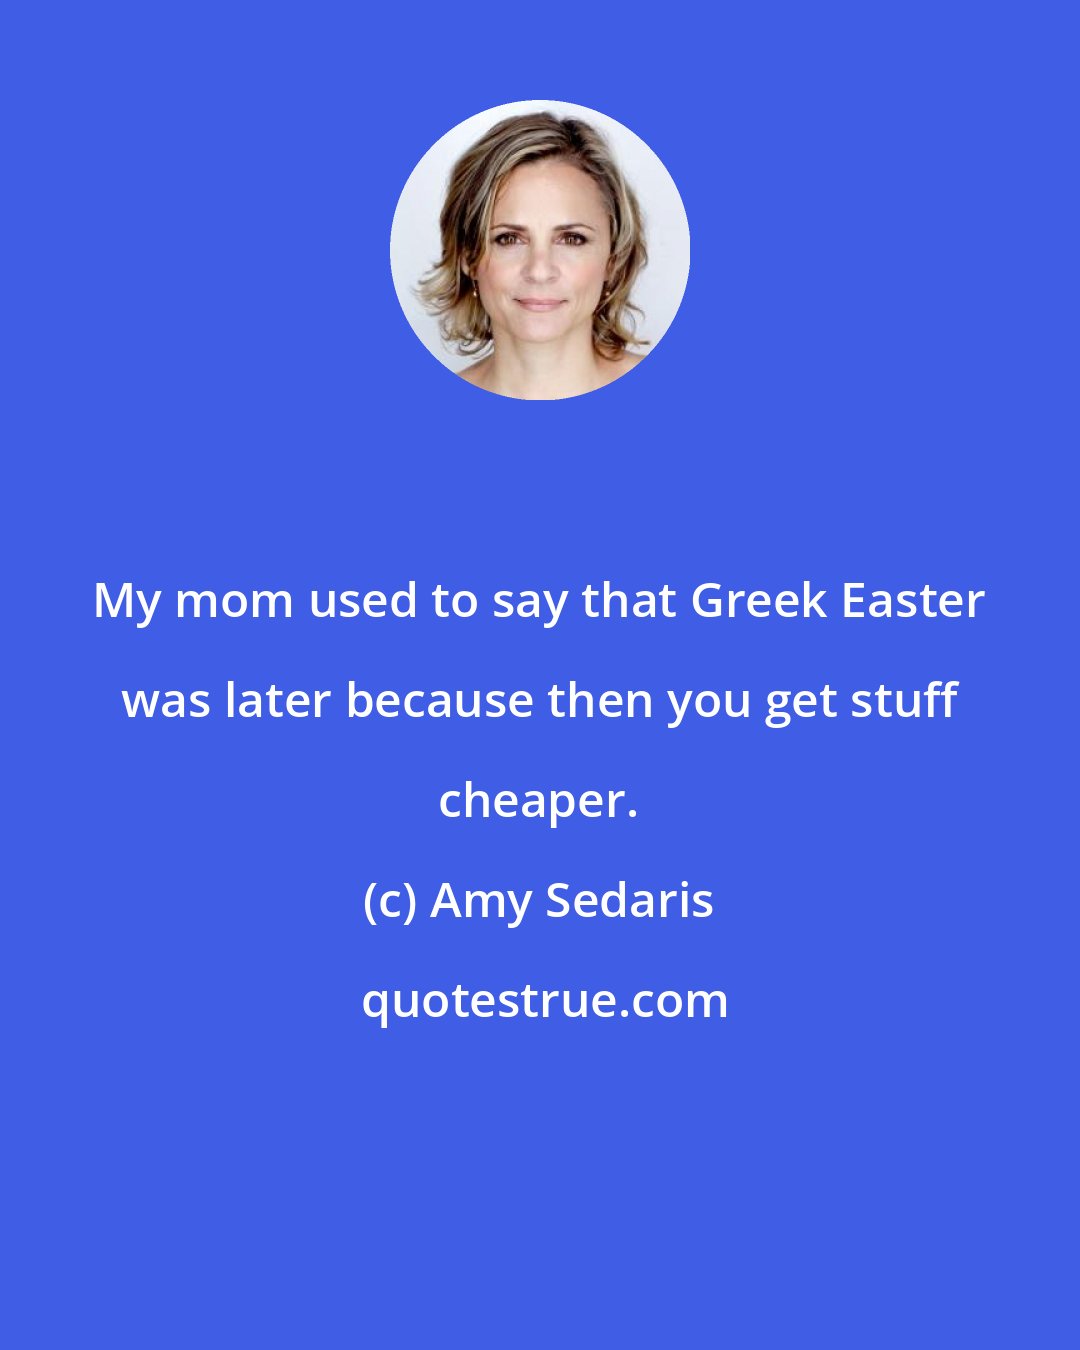 Amy Sedaris: My mom used to say that Greek Easter was later because then you get stuff cheaper.